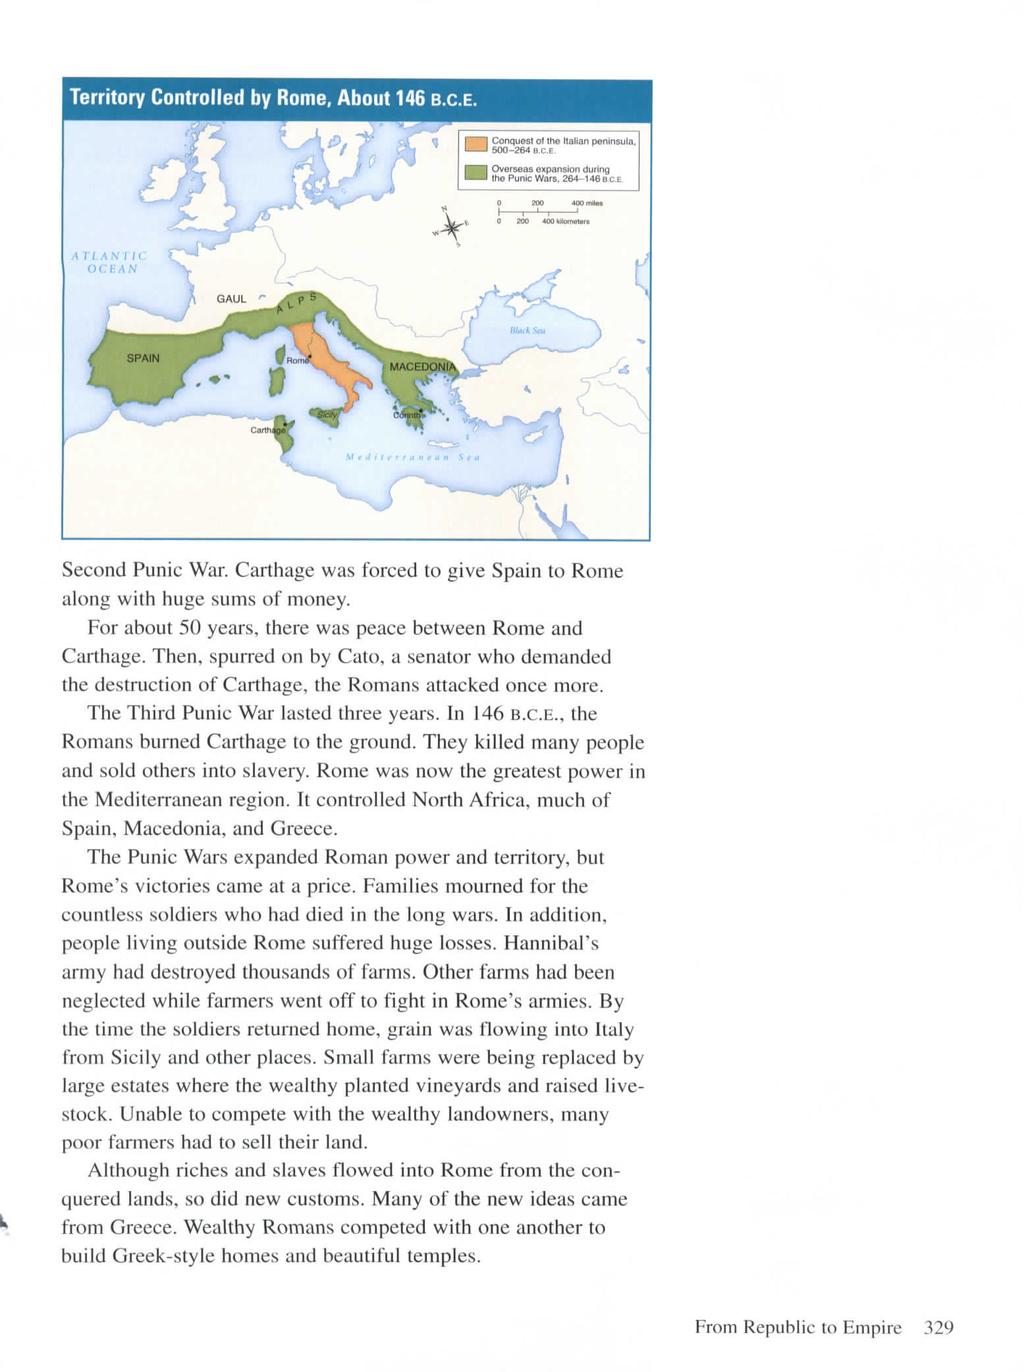 Territory Controlled by Rome, About 146 B.C.E. Second Punic War. Carthage was forced to give Spain to Rome along with huge sums of money. For about 50 years, there was peace between Rome and Carthage.